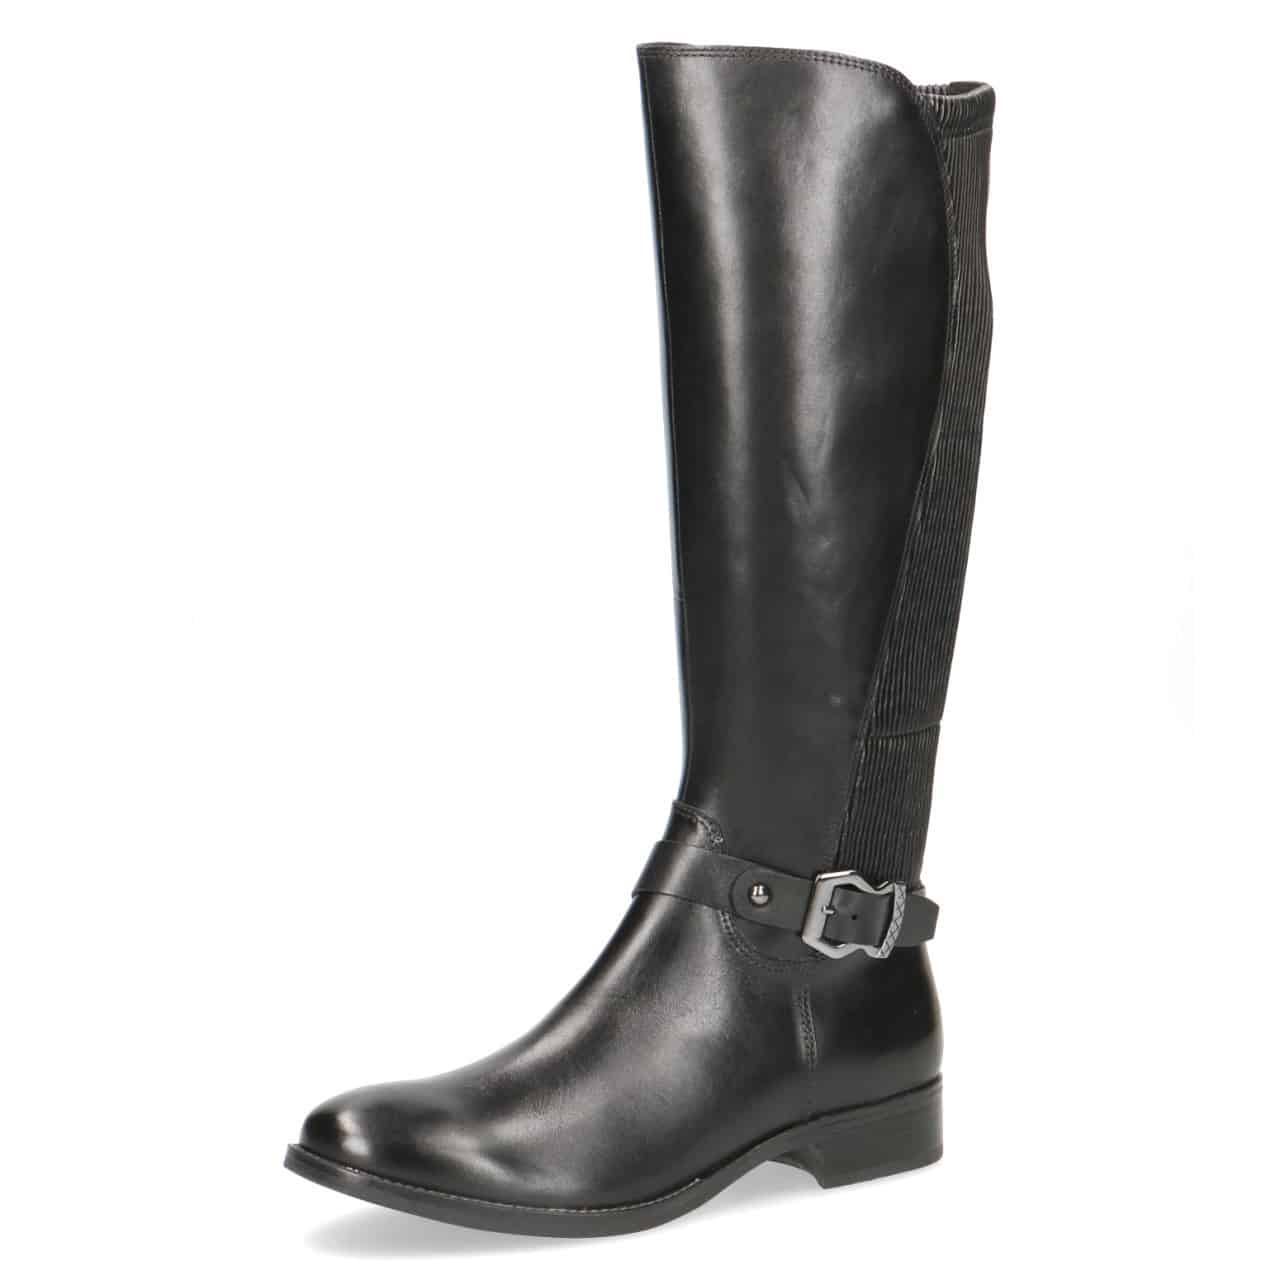 Caprice Women's 25509 Leather Knee High Boots Black